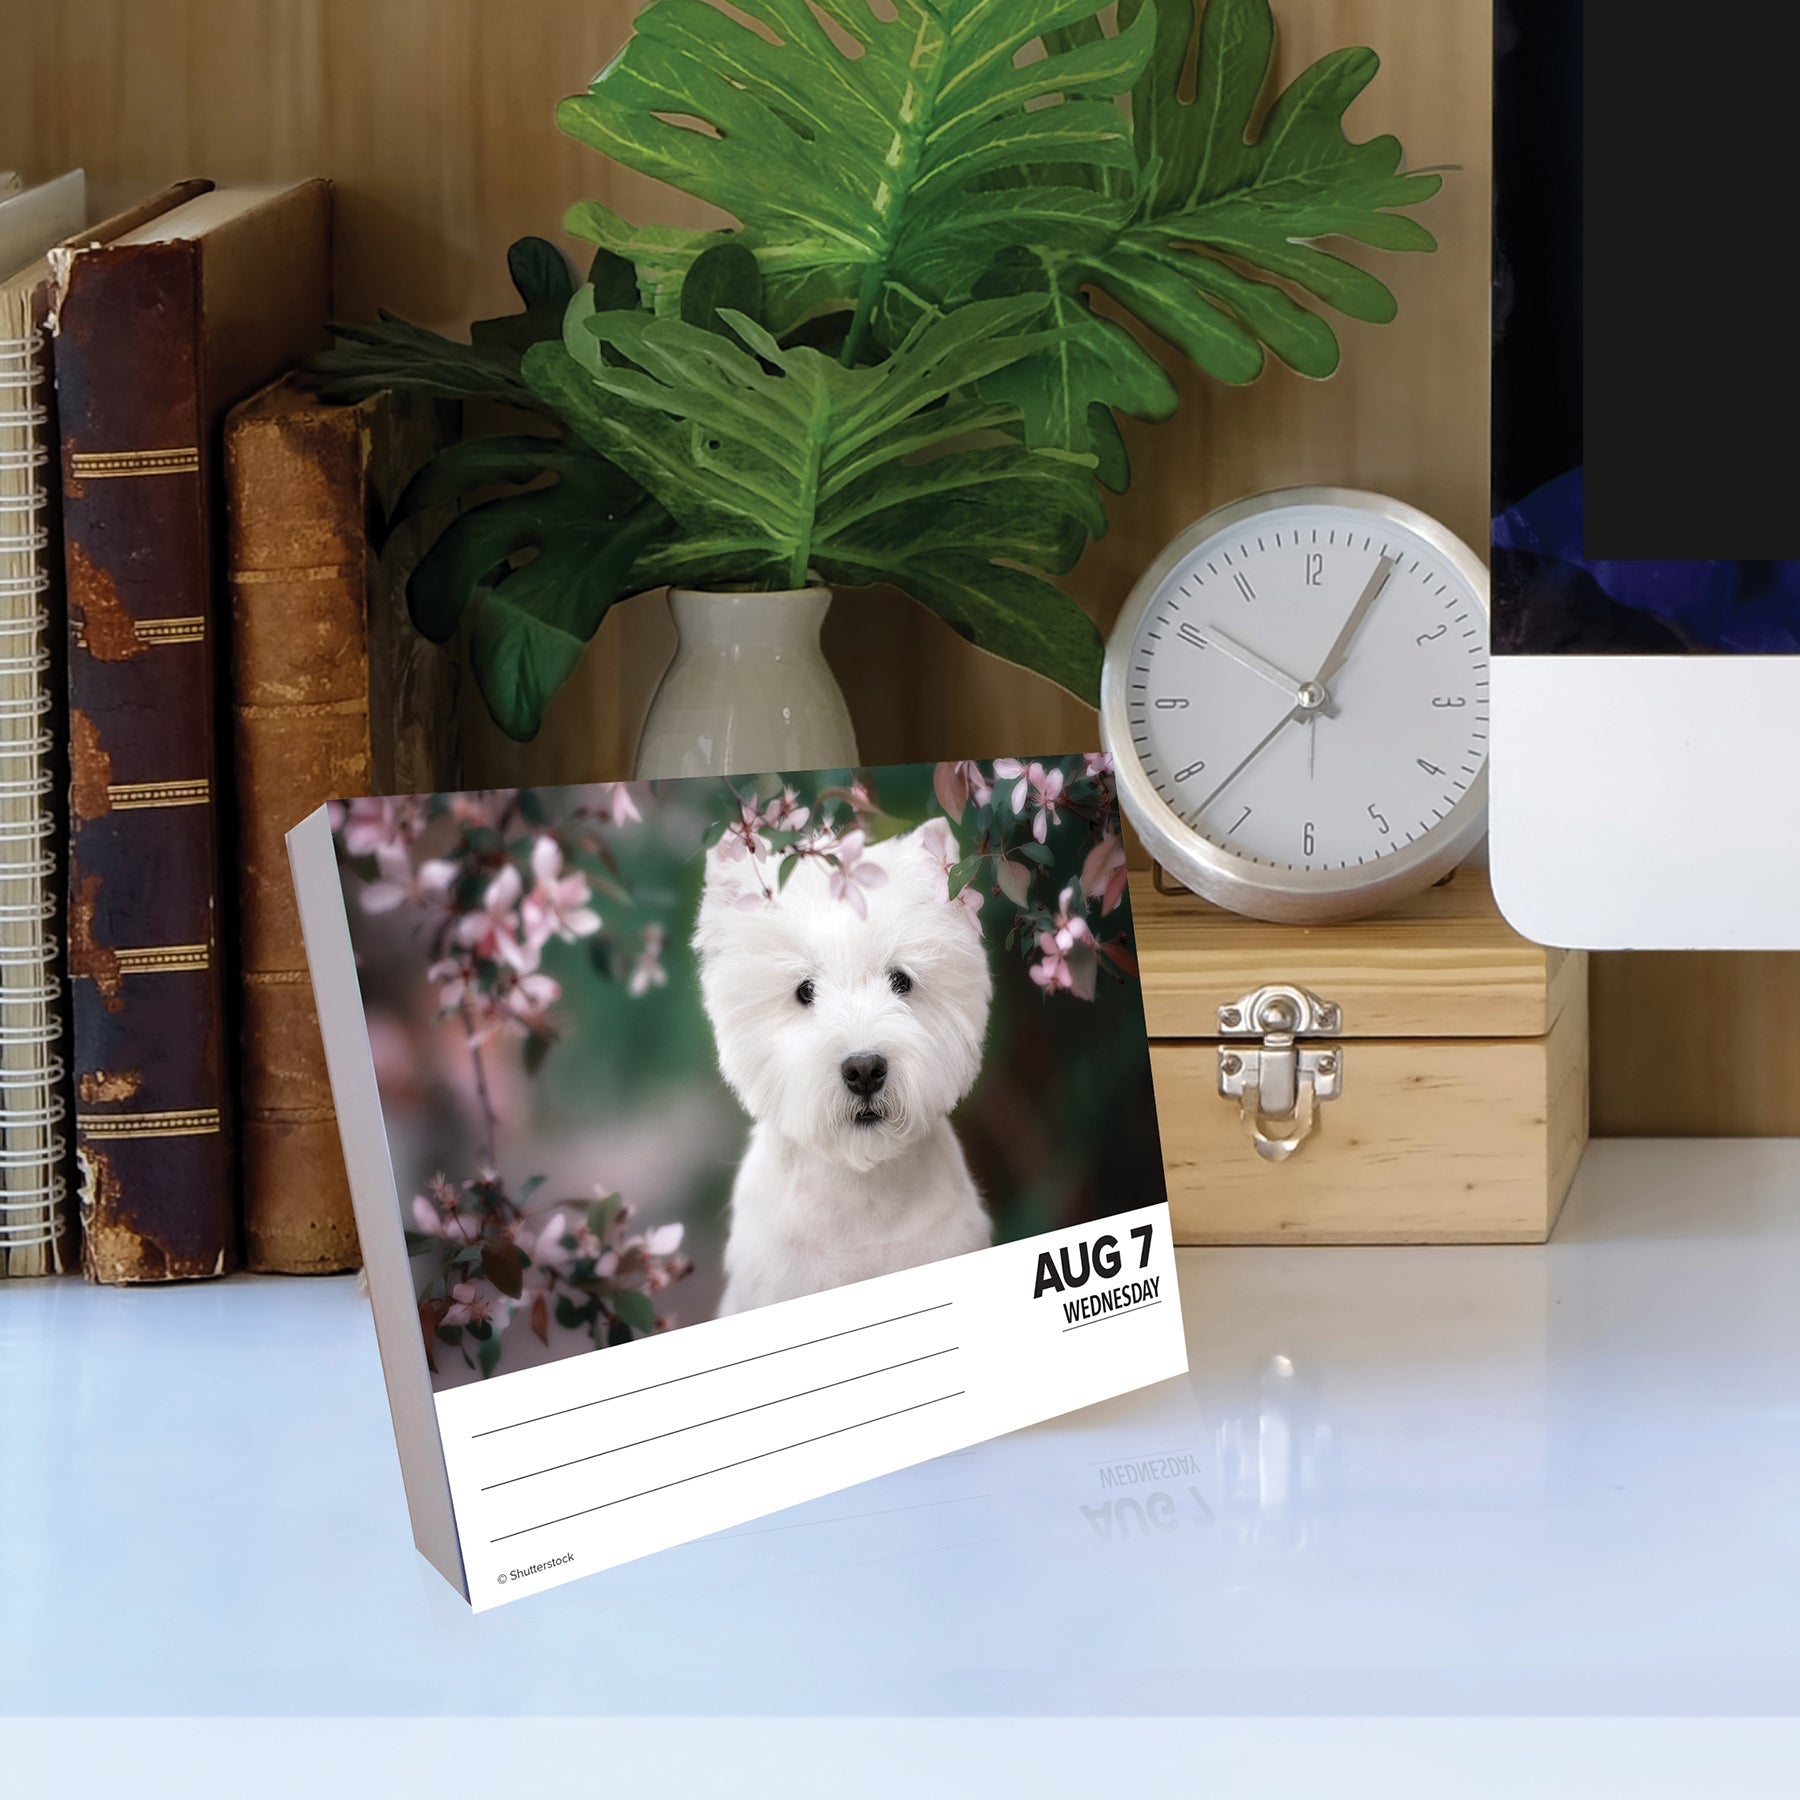 2024 Westies - Daily Boxed Page-A-Day Calendar US